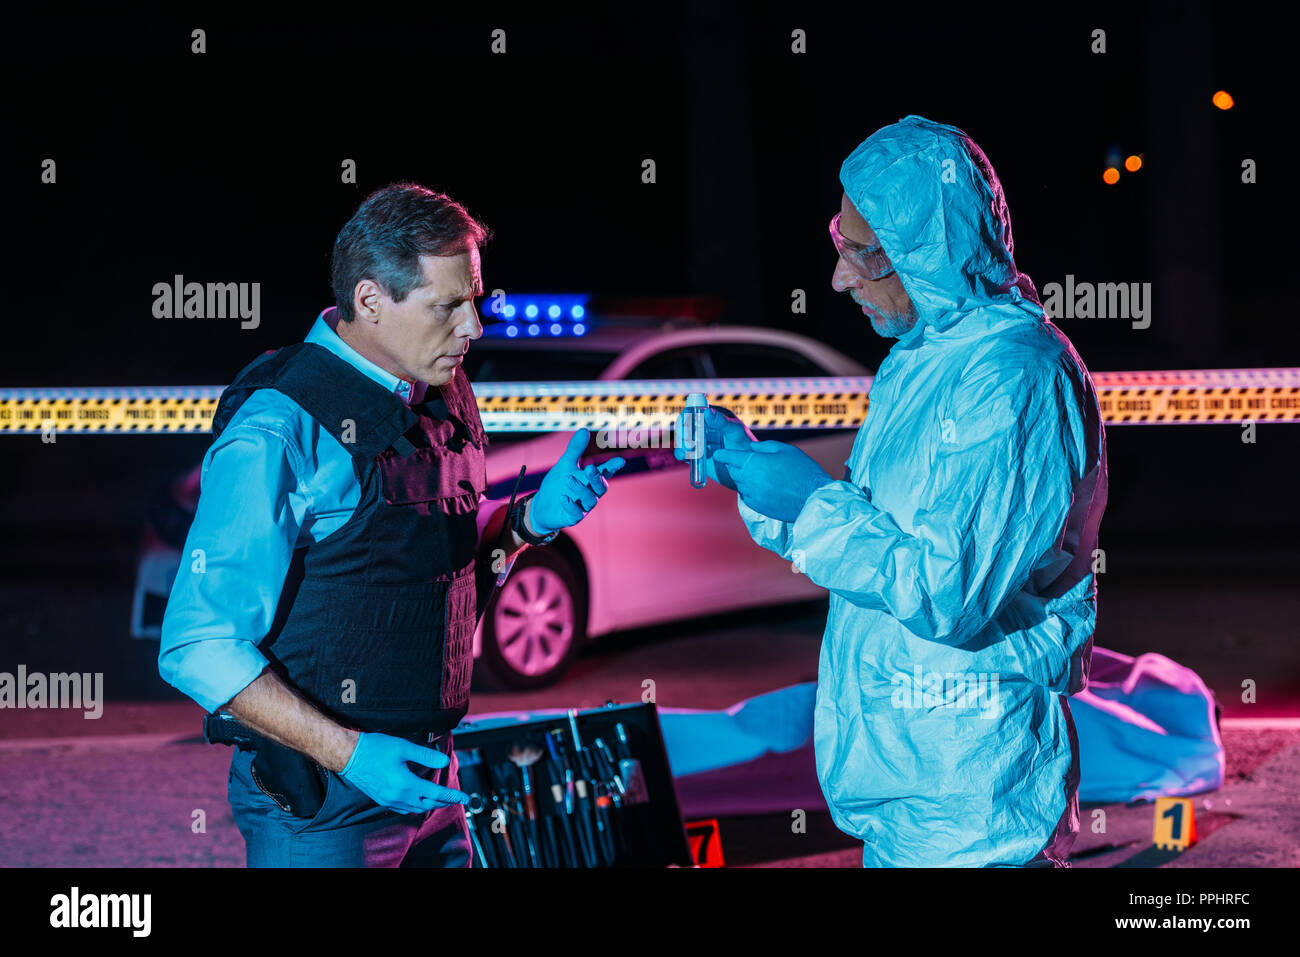 male criminologist in protecitve suit showing evidence to mature policeman at crime scene with corpse in body bag Stock Photo